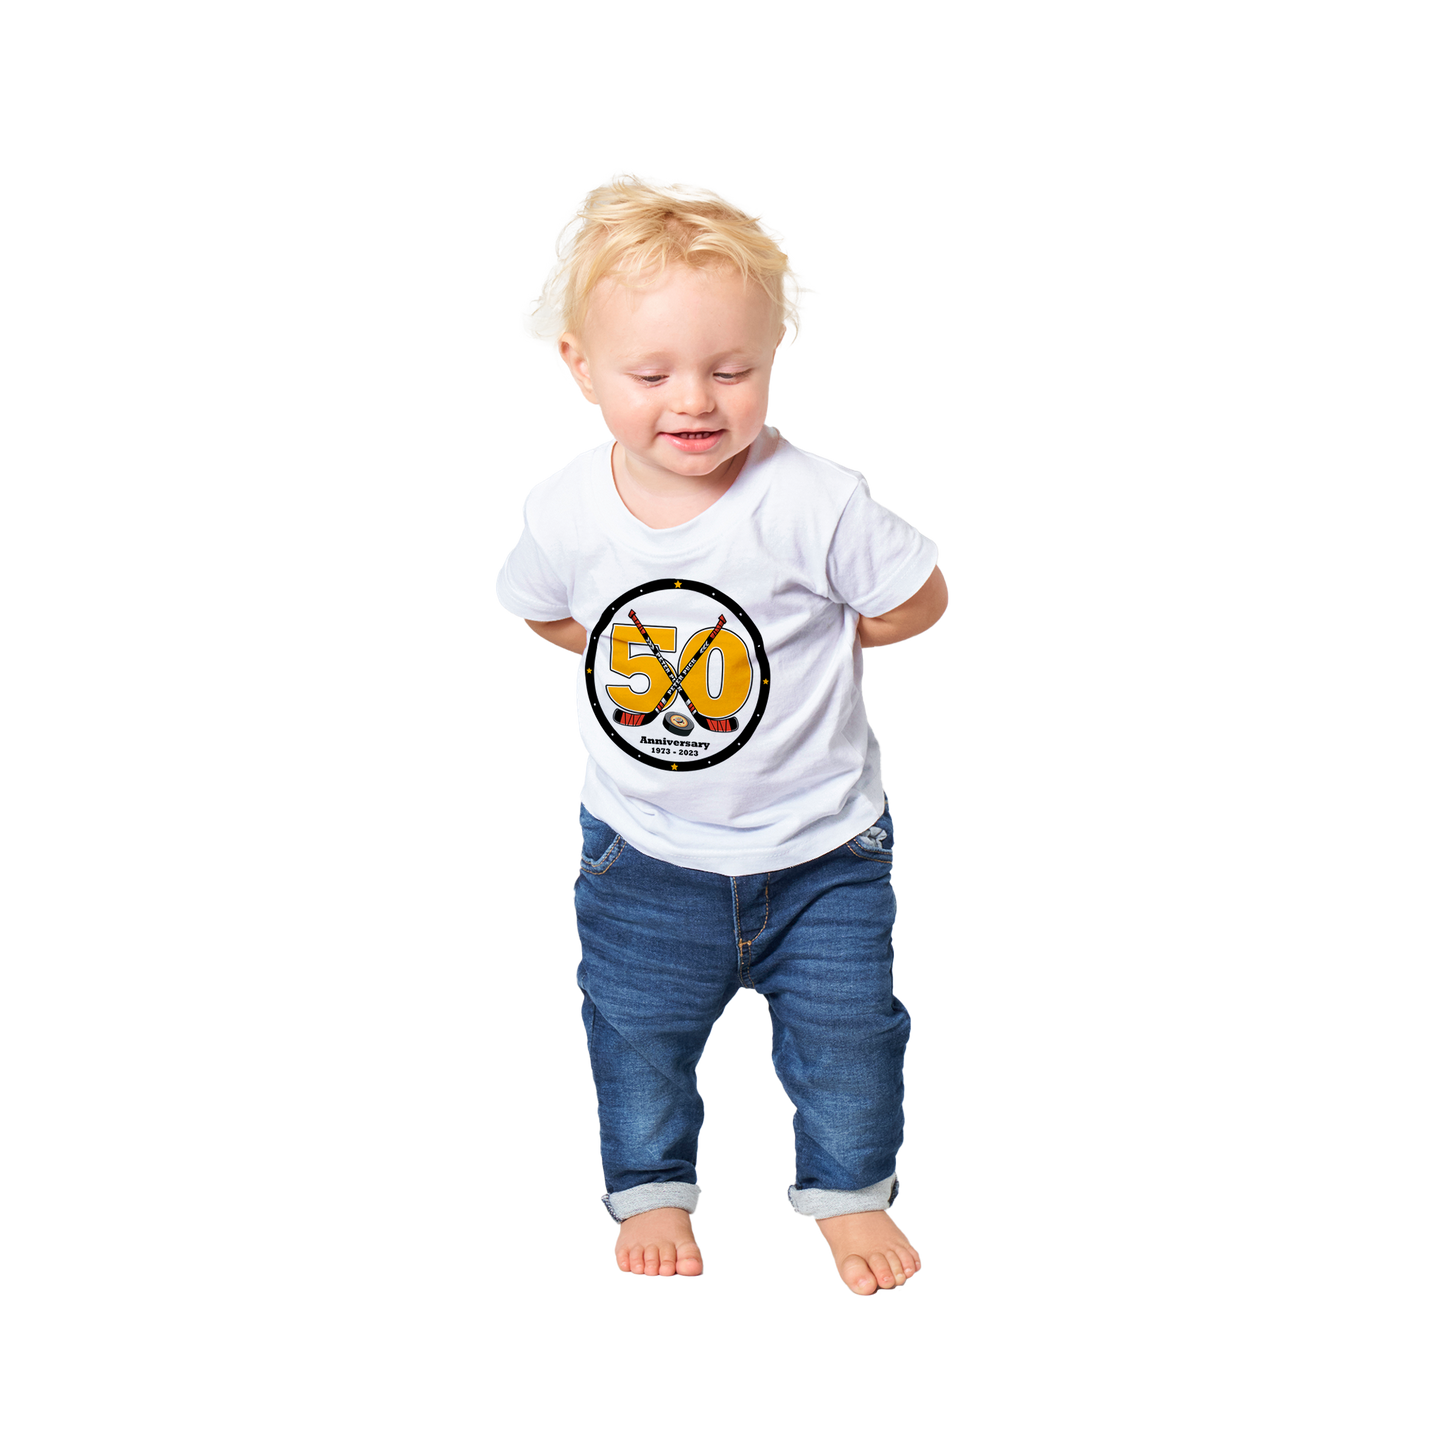 Peter's 50th Anniversary Crest Classic Baby Crewneck T-shirt